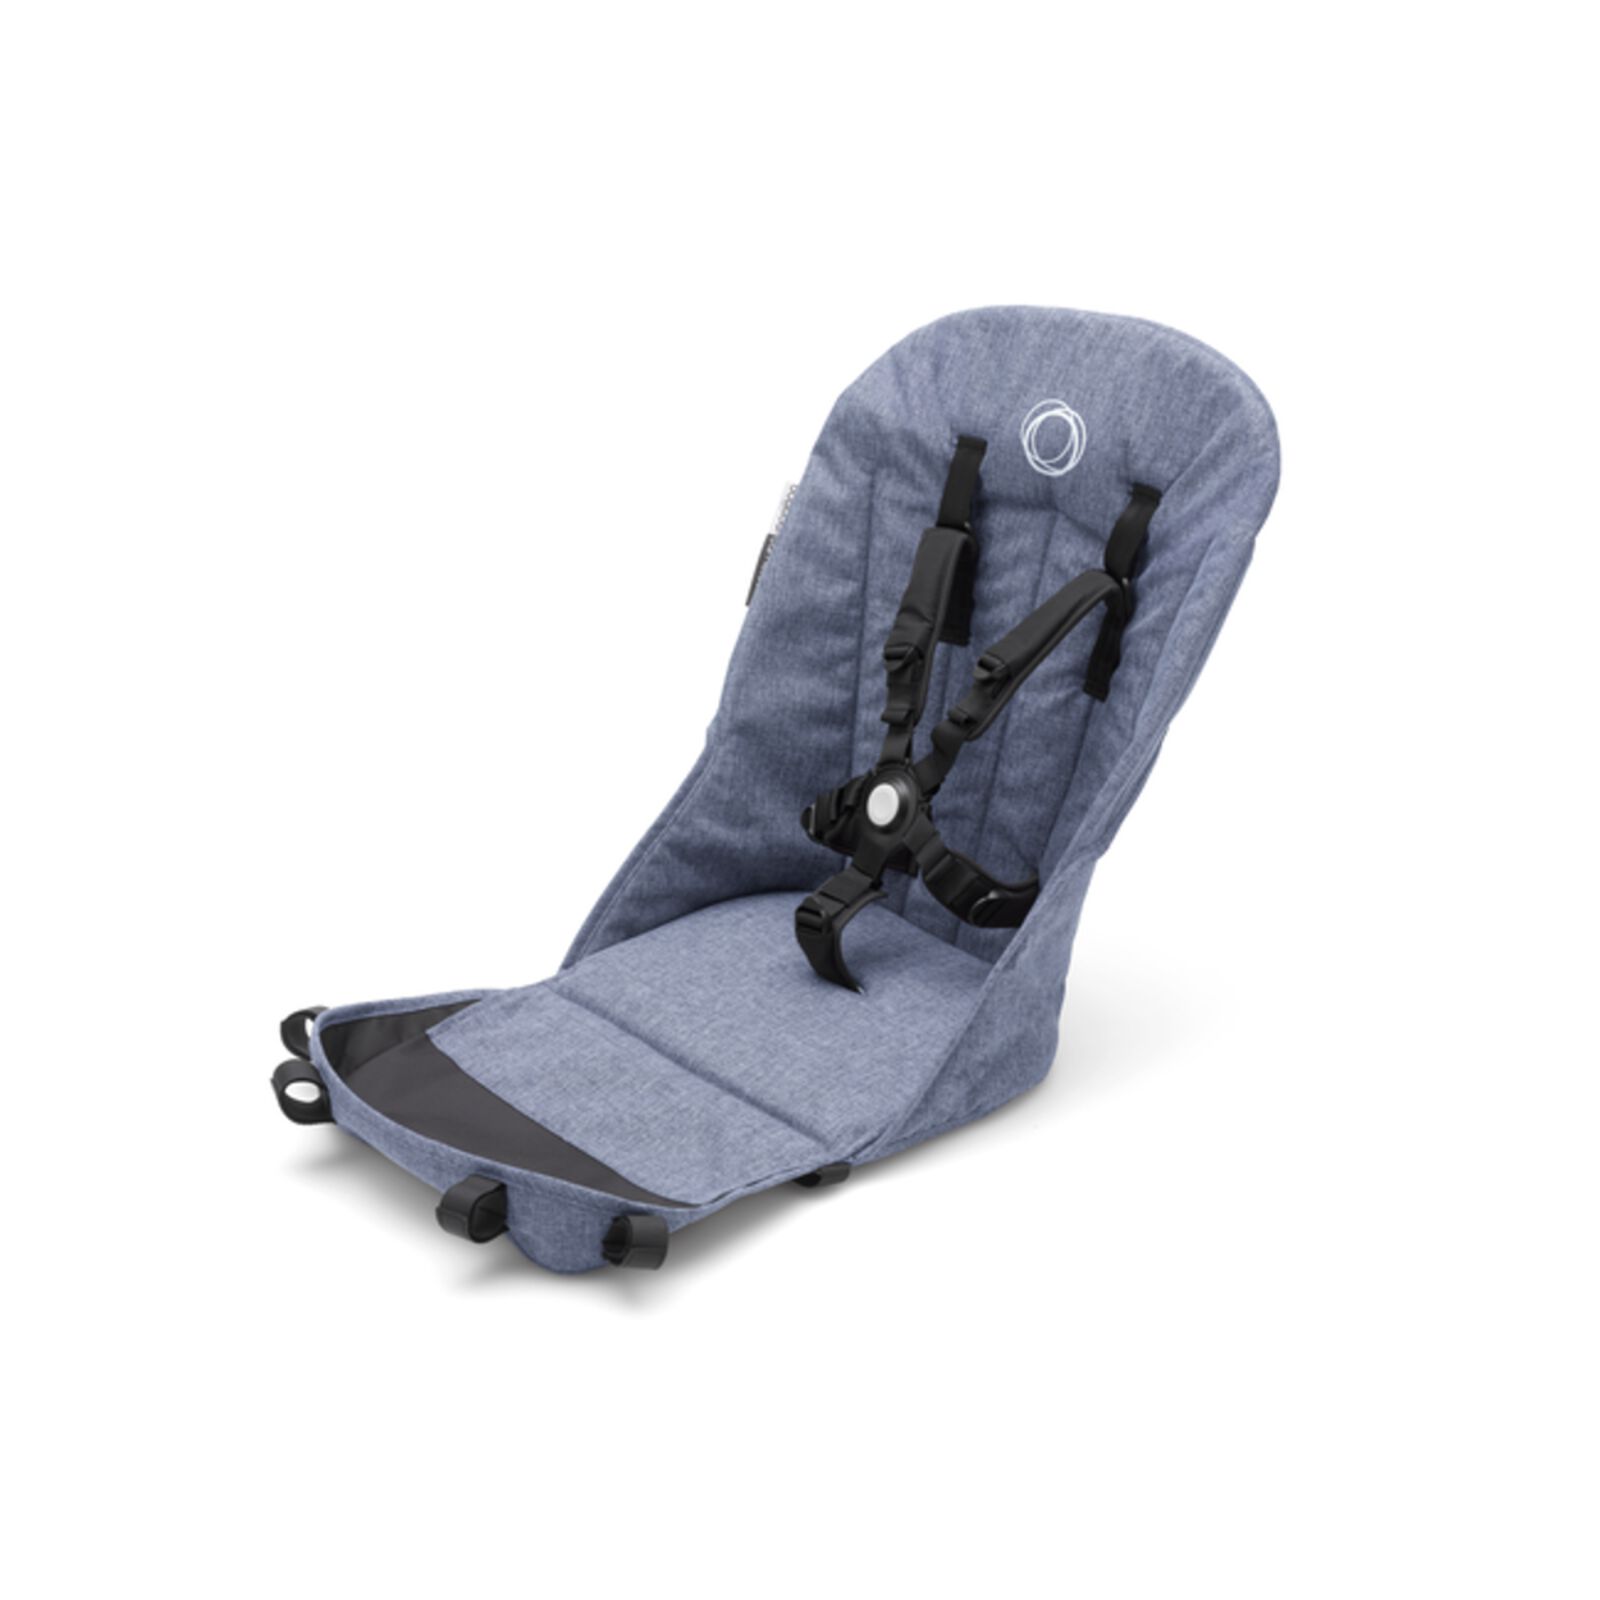 Bugaboo Cameleon 3 seat fabric - View 1